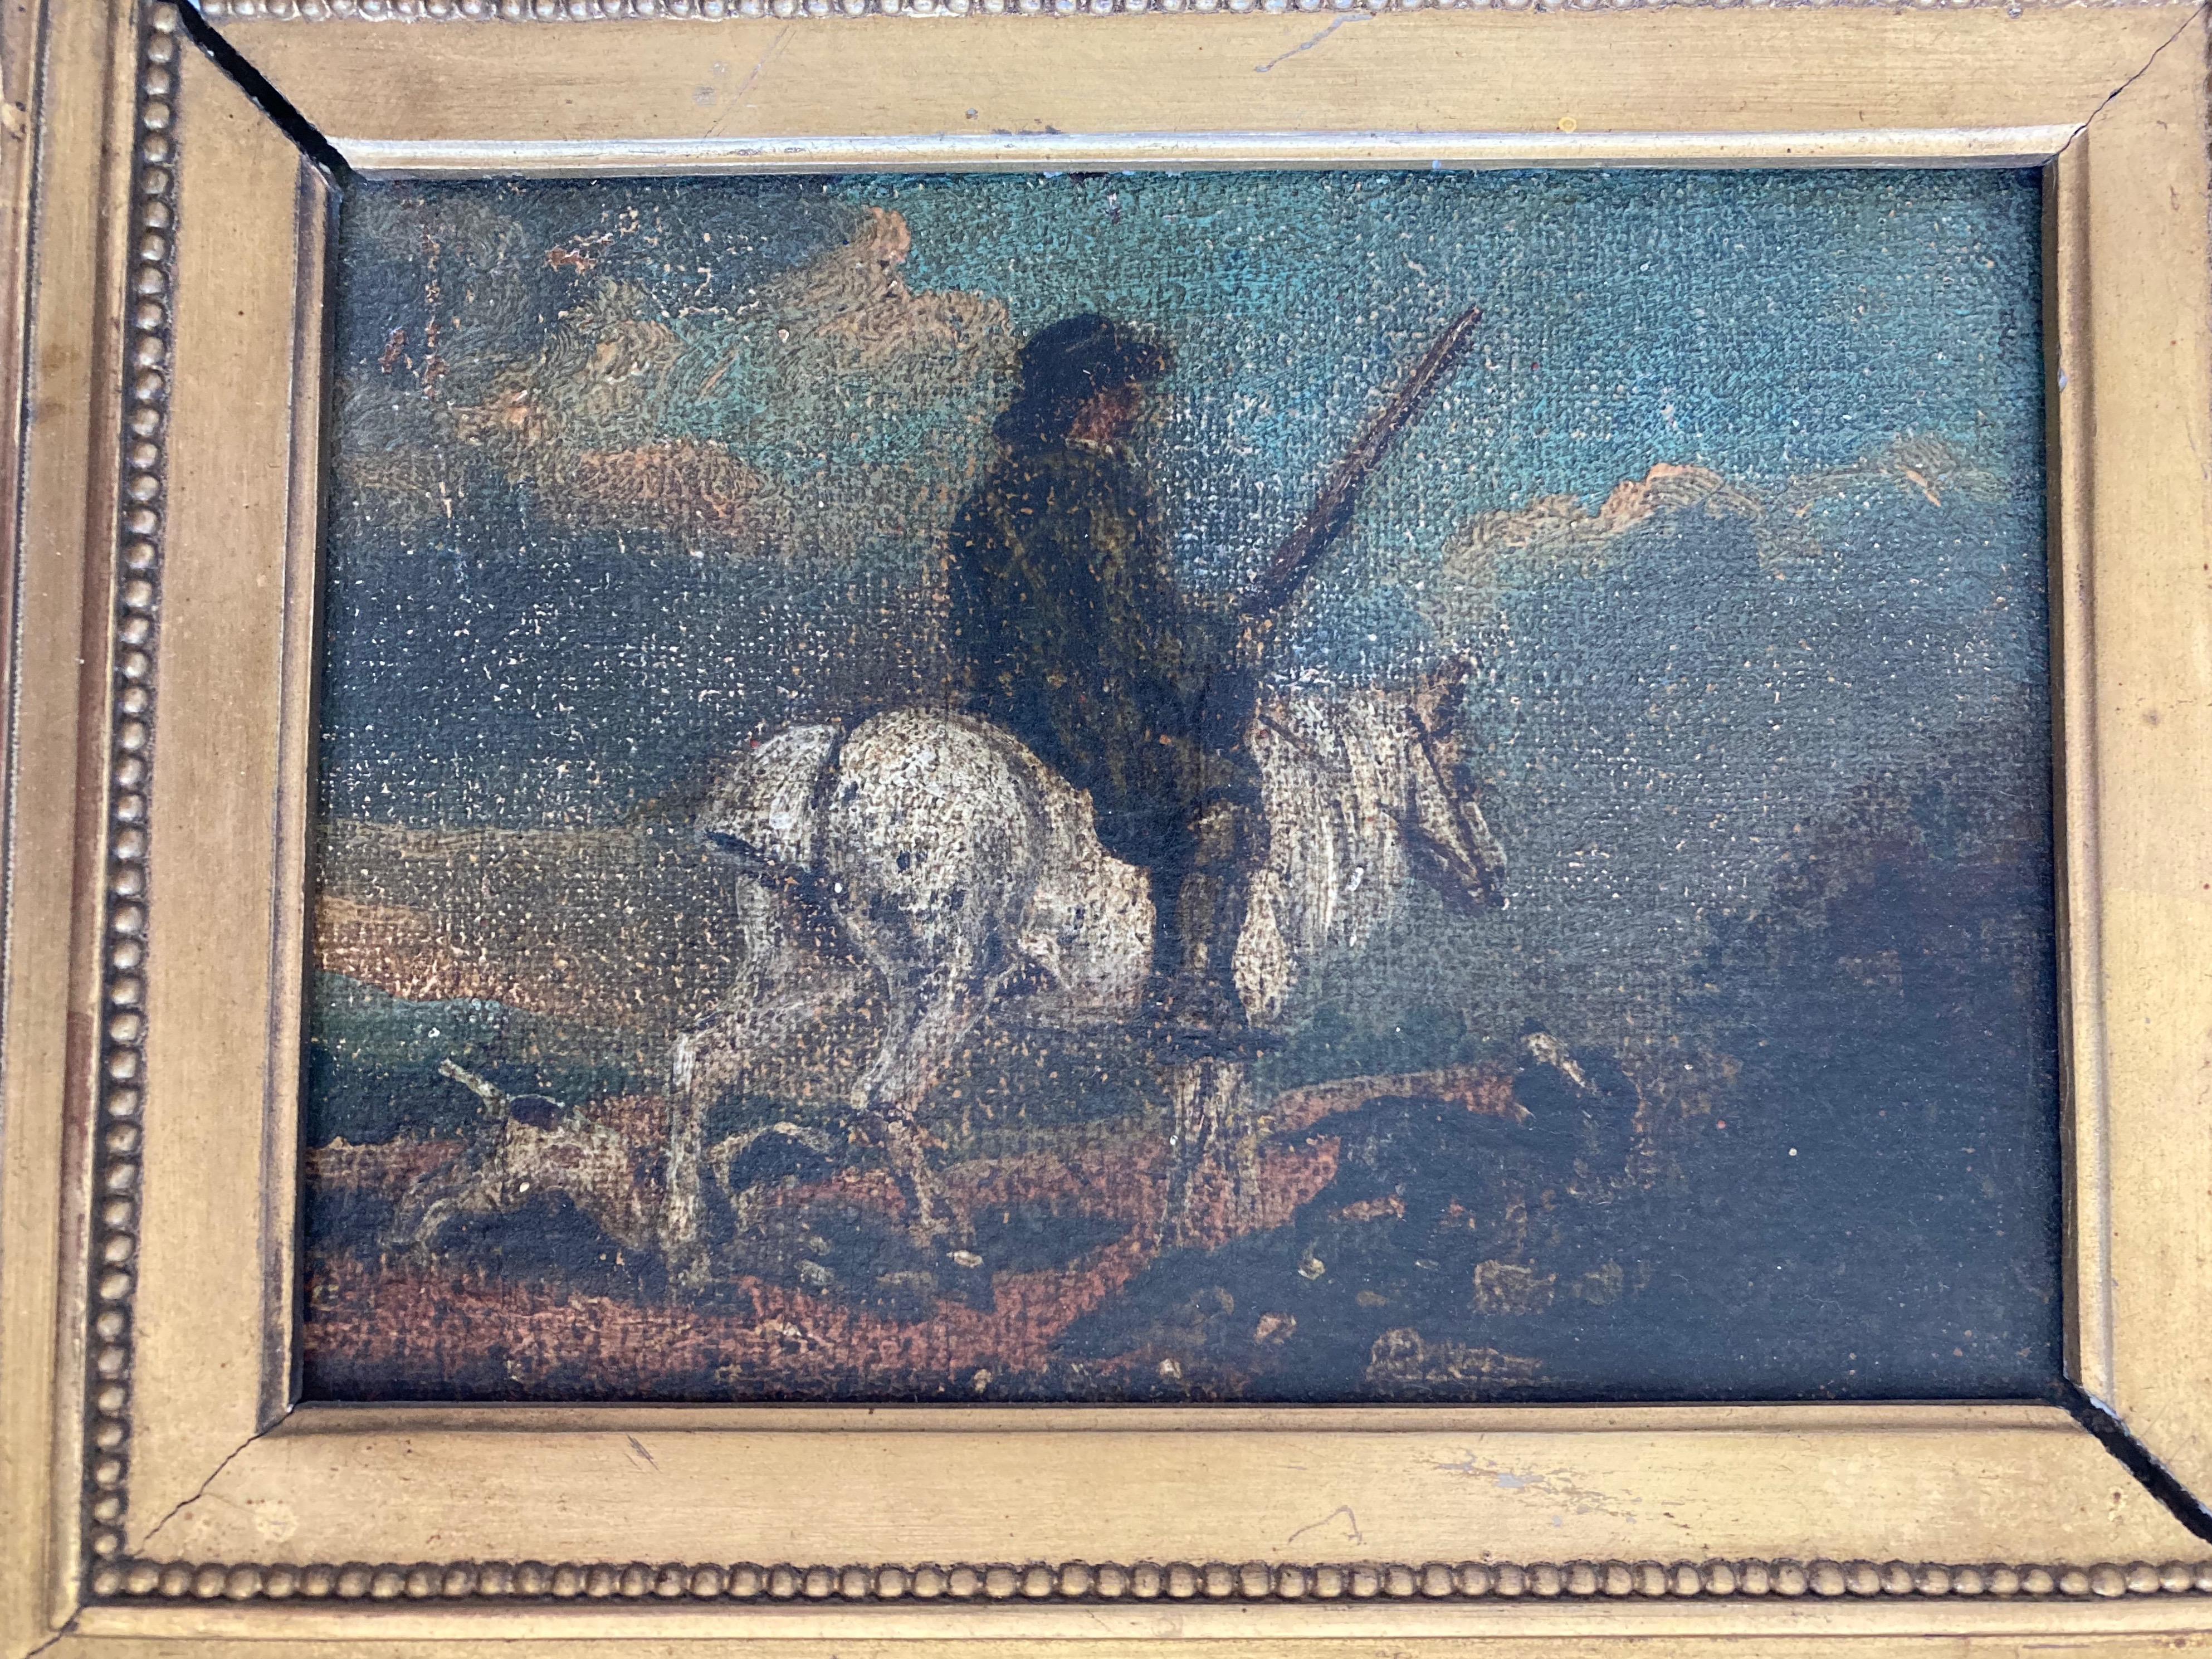 A charming rustic scene with a huntsman on horseback with his hounds.

Follower of Edmund Bristow, early 19th Century
Huntsman and hounds
Oil on canvas laid down on board
4 x 5½ inches without the frame
10 x 11¾ inches including the frame